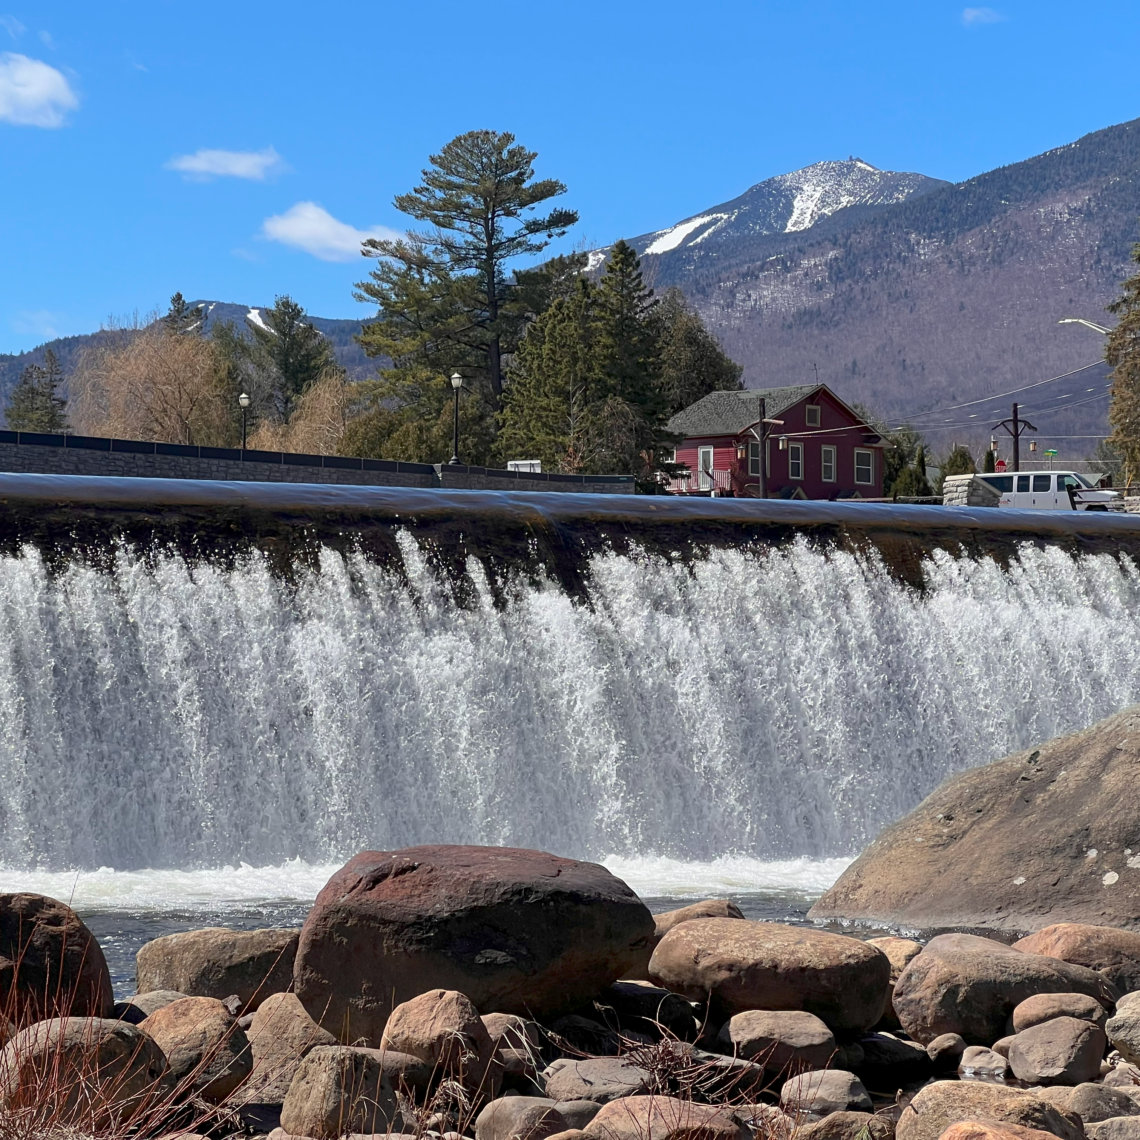 A dam with The New School's van parked behind the falls. Above the falls are a red building and several trees. Mountain ridges are in the background.